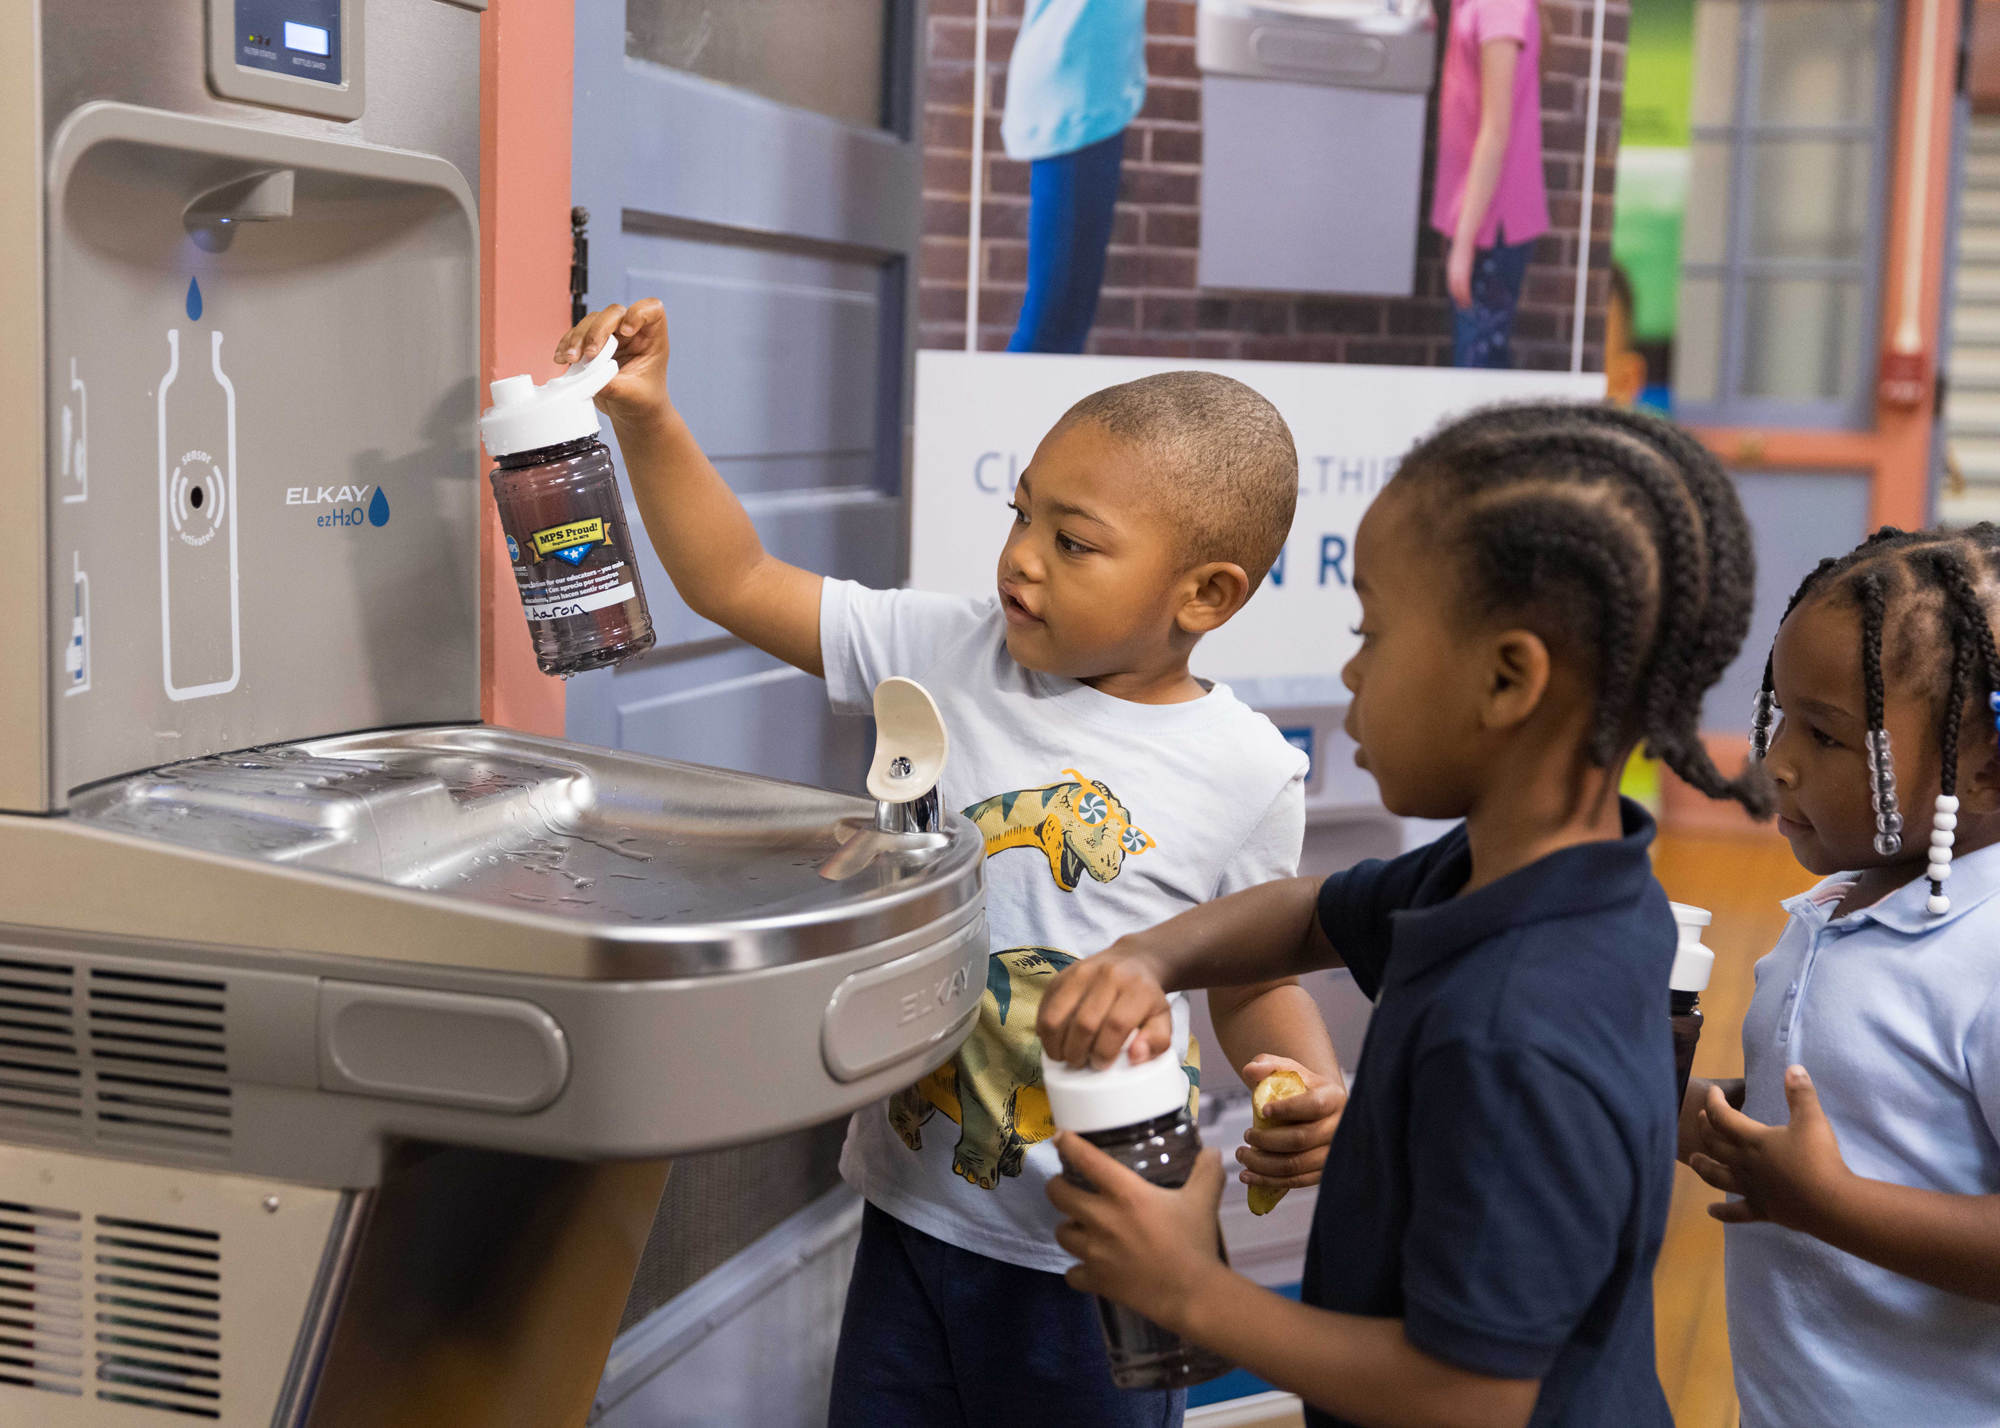 Starms students use their new Elkay bottle filling station